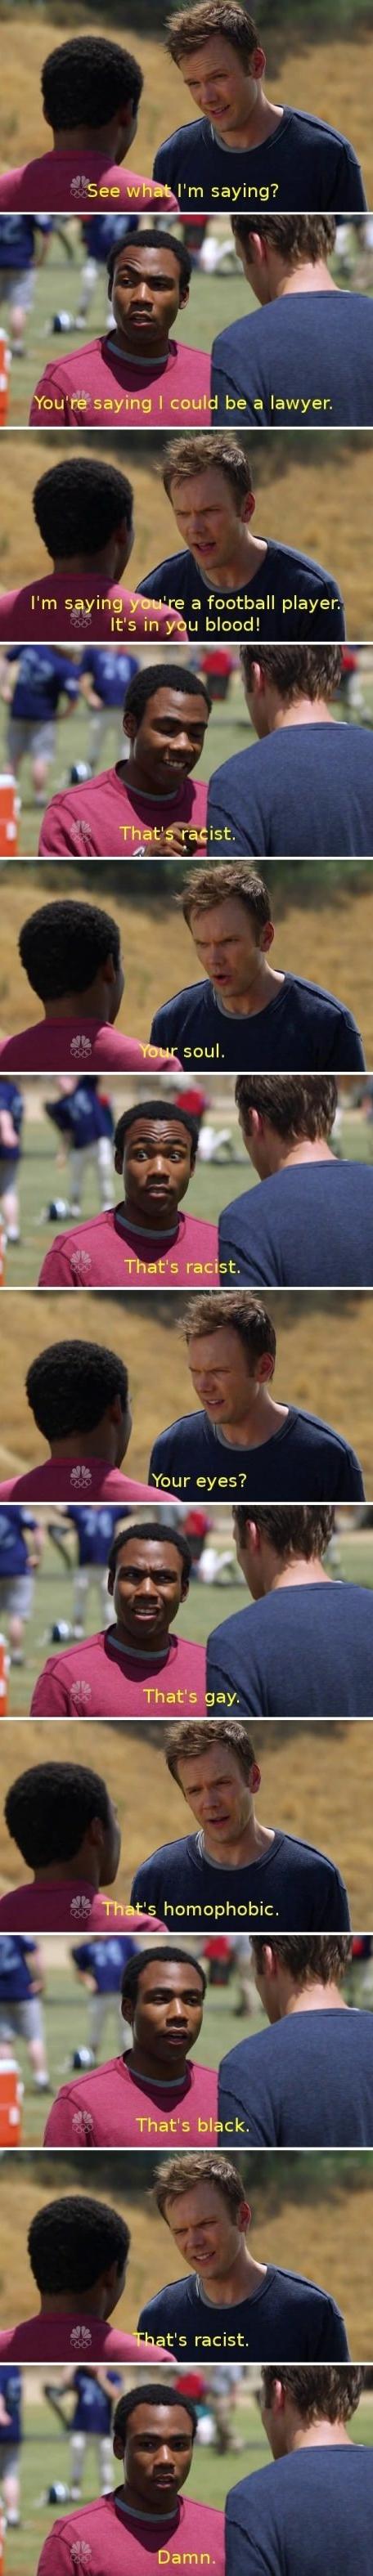 Community - See what I'm saying? You're saying I could be a lawyer. I'm saying you're a football player. It's in you blood! That's racist. Your soul. That's racist. Your eyes? That's gay. That's homophobic. That's black. That's racist. Damn.